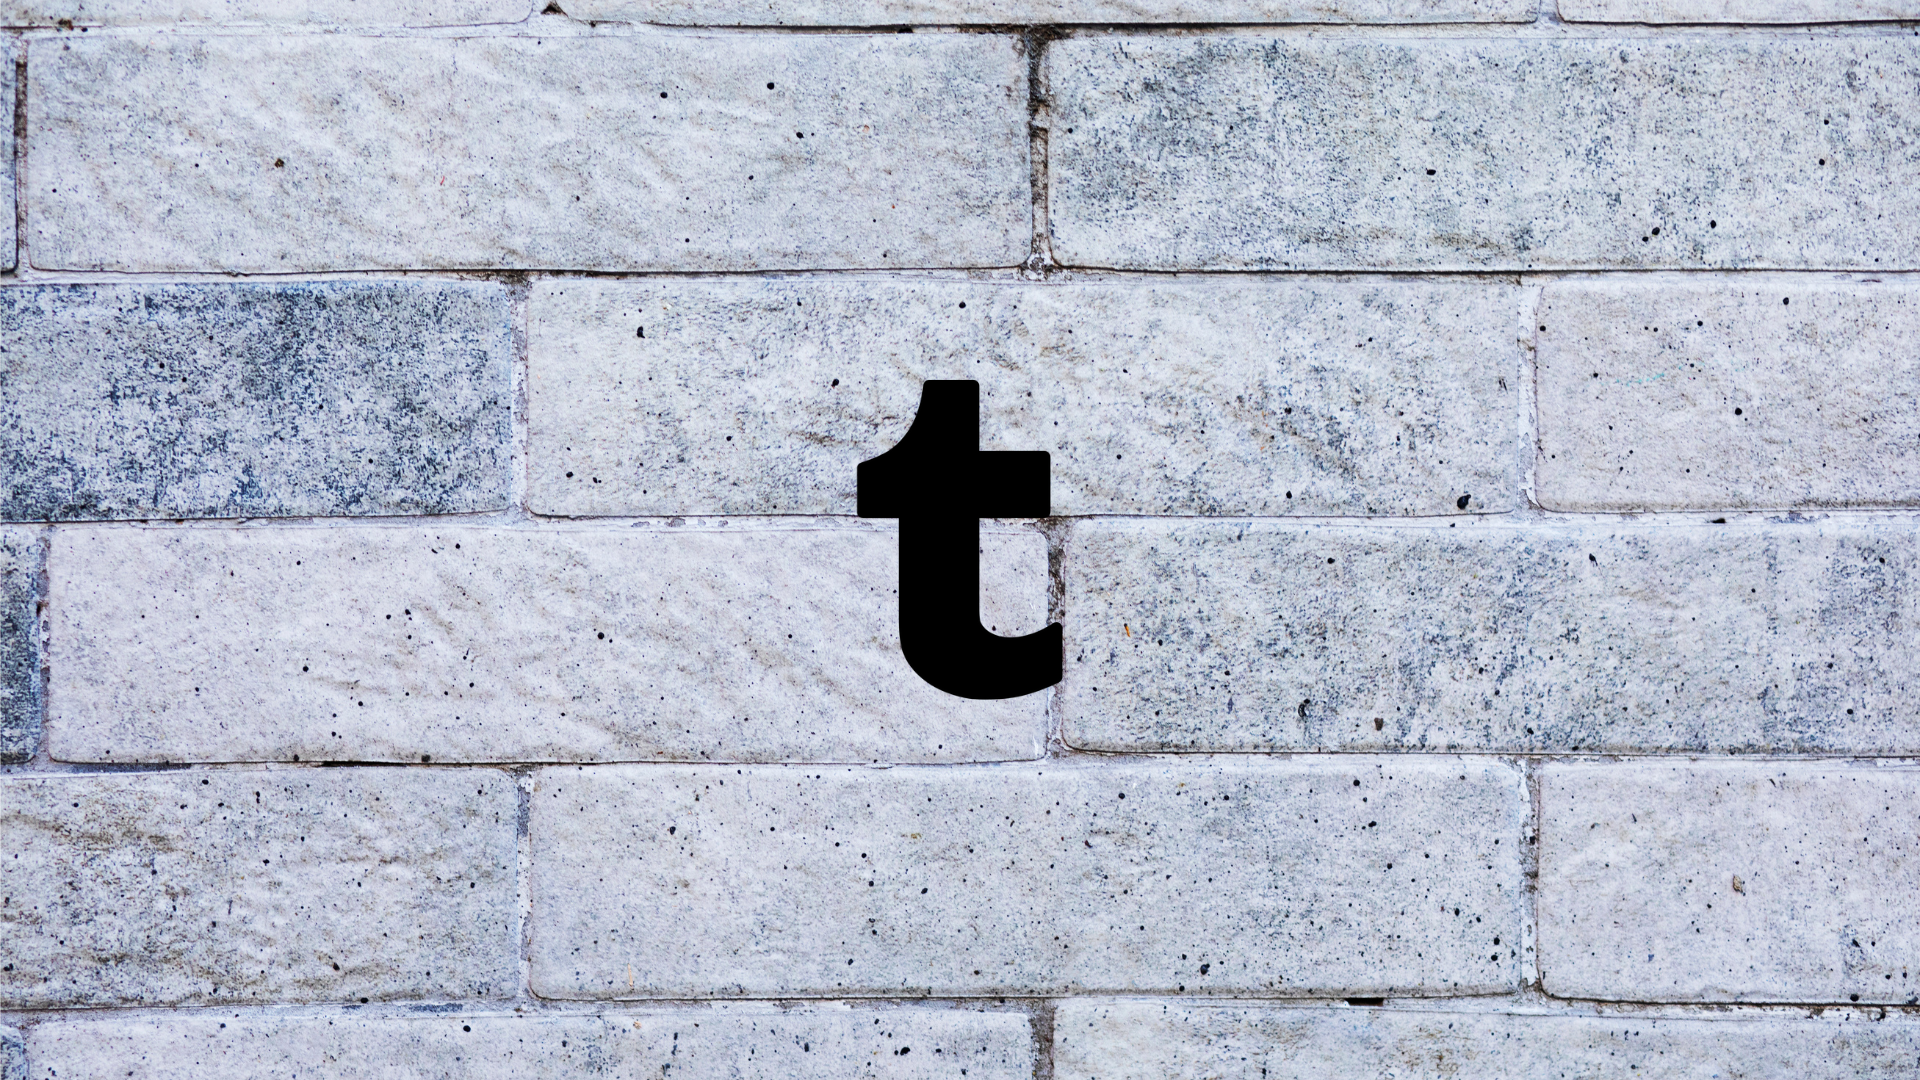 Tumblr Communities Feature Now Available in Open Beta